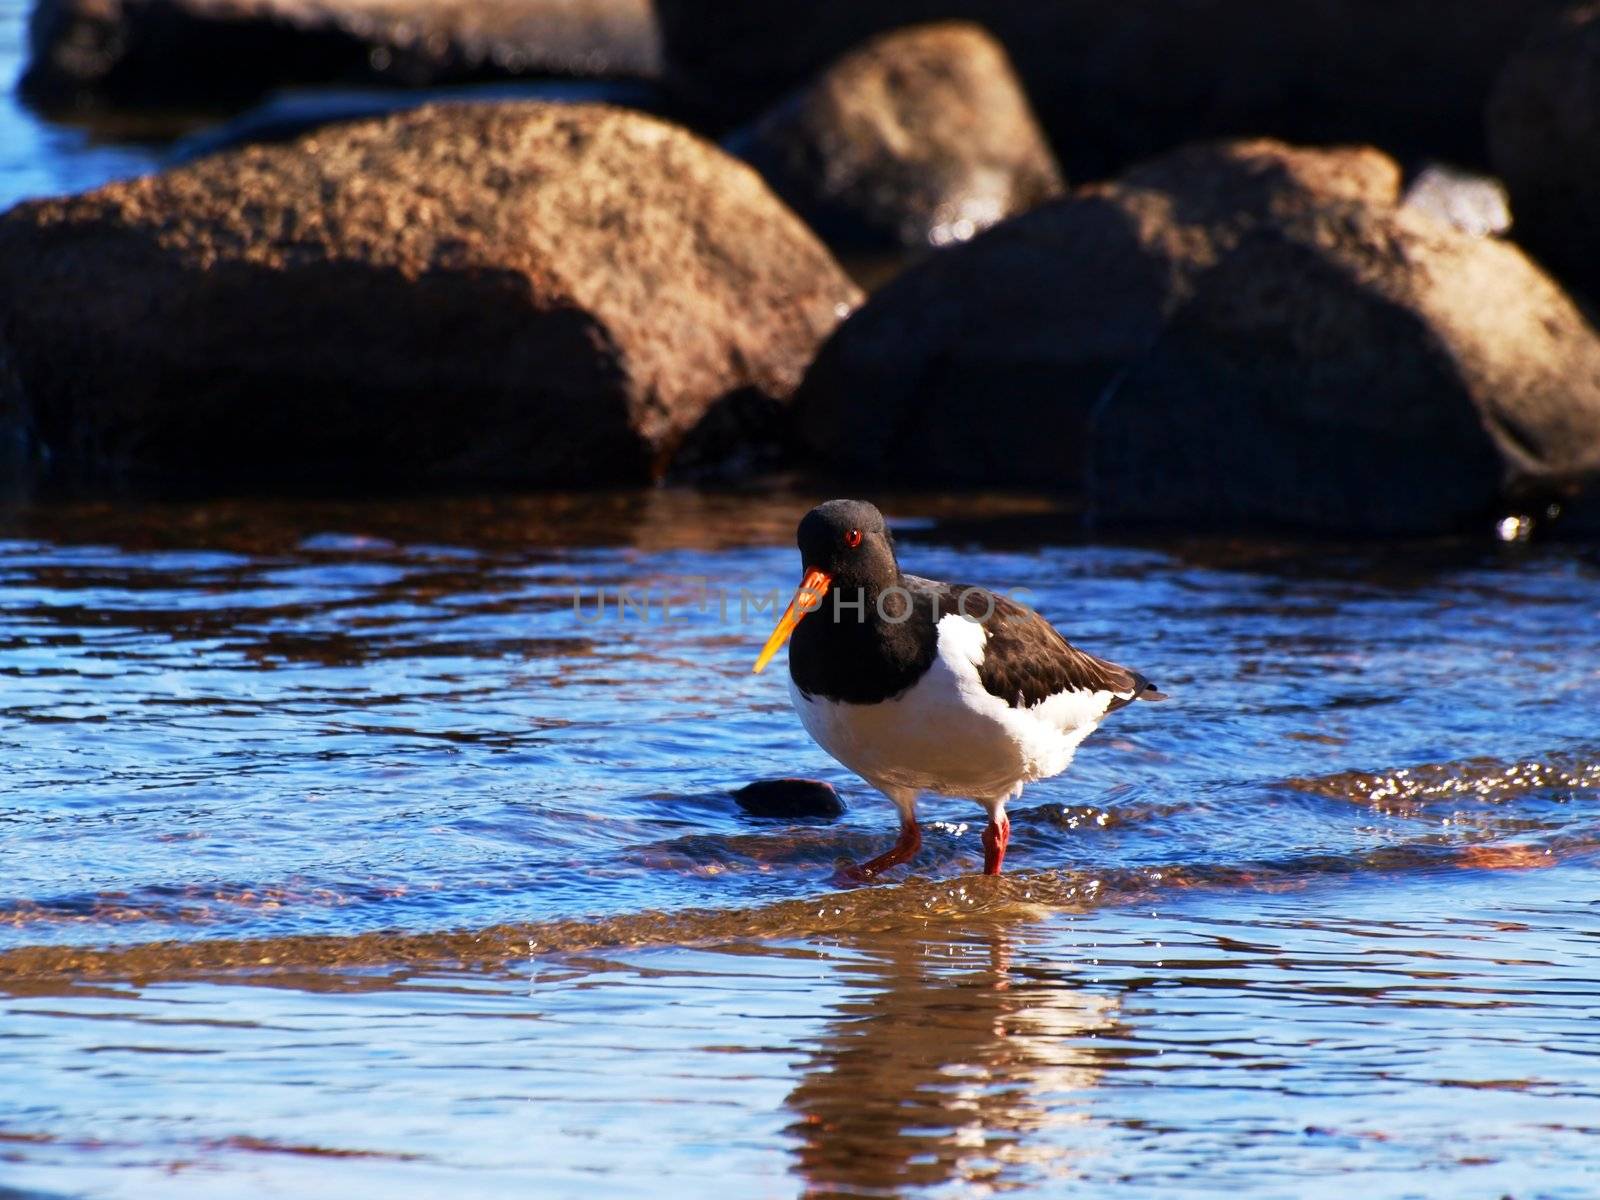 Oystercatcher, from the family Haematopodidae, wading for food in the blue sea water